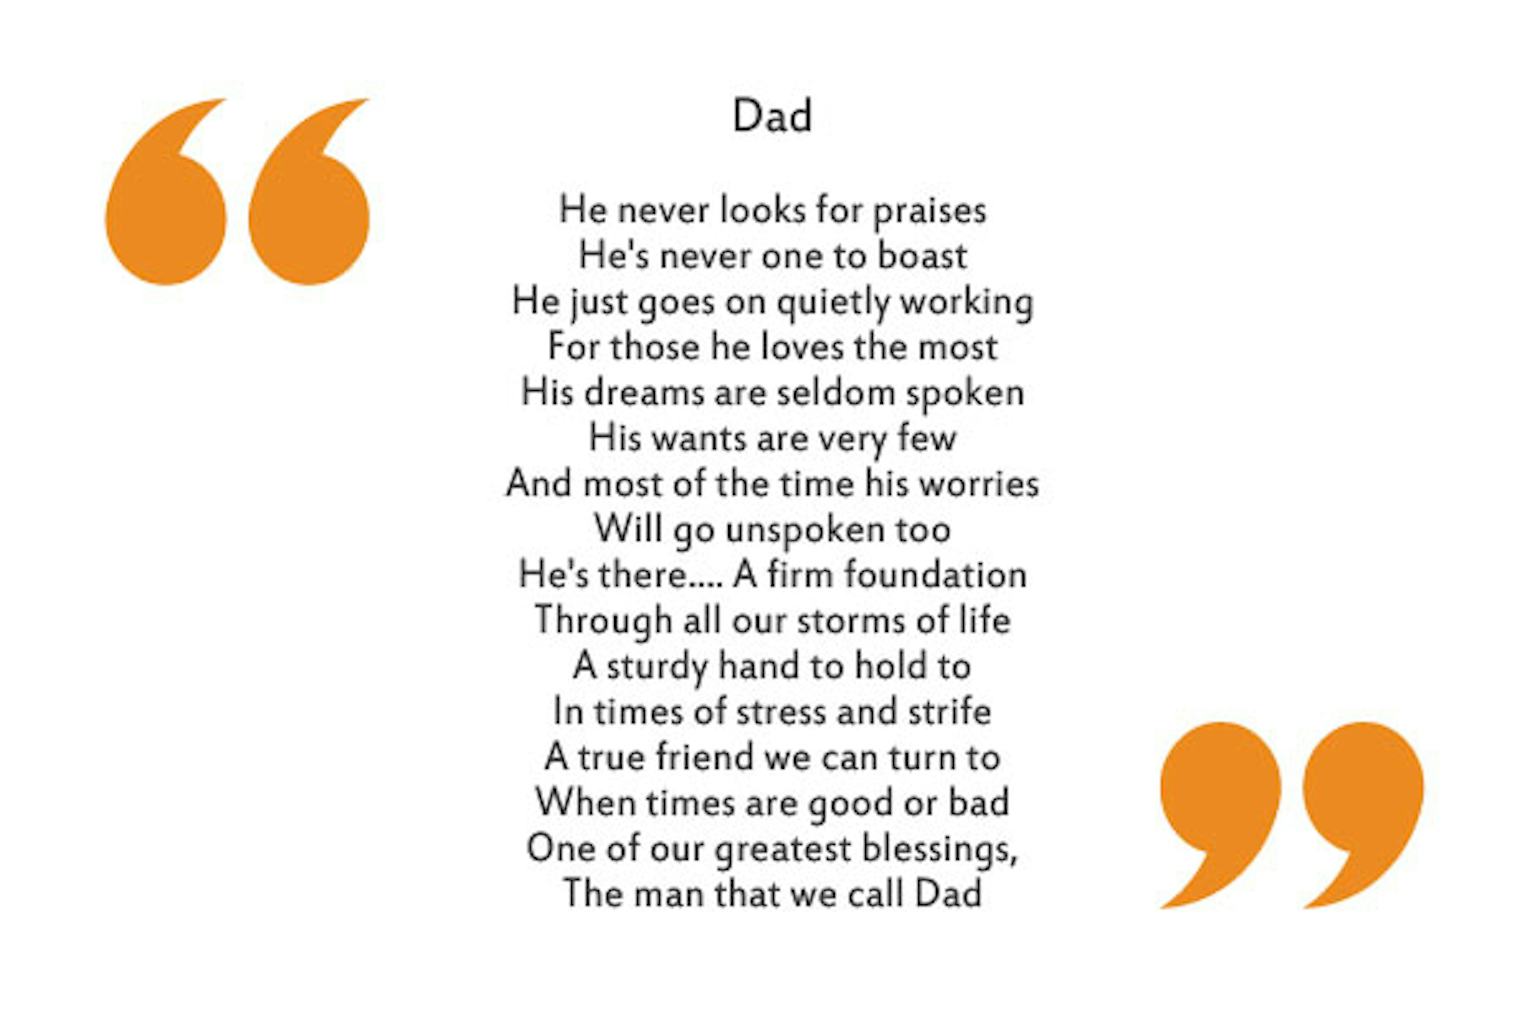 15 Father's Day Poems That'll Make You and Your Dad Tear Up